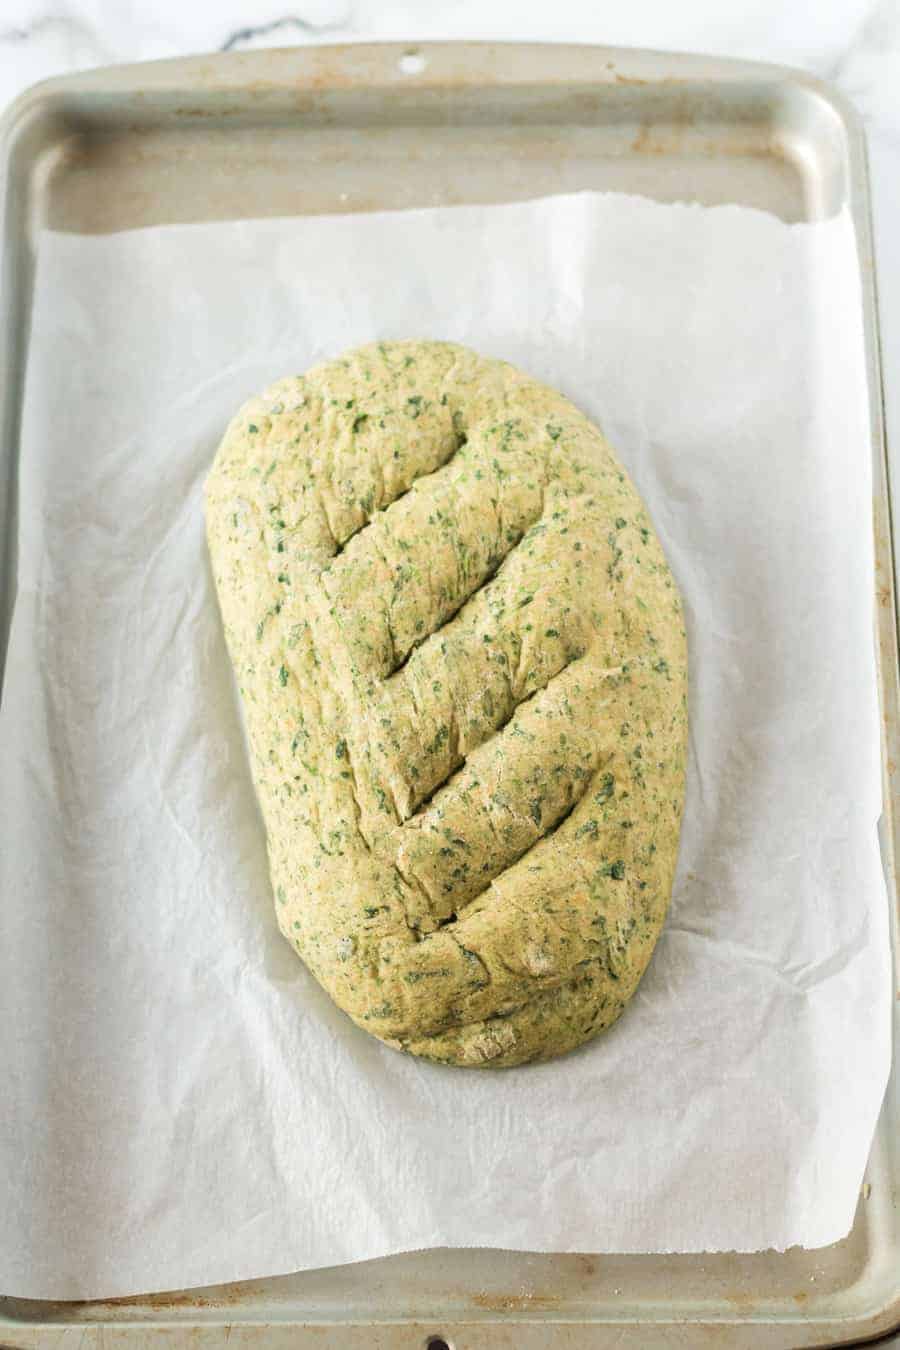 Rustic whole wheat spinach bread made with fresh or frozen spinach for a healthy and colorful bread you'll love to make and eat.